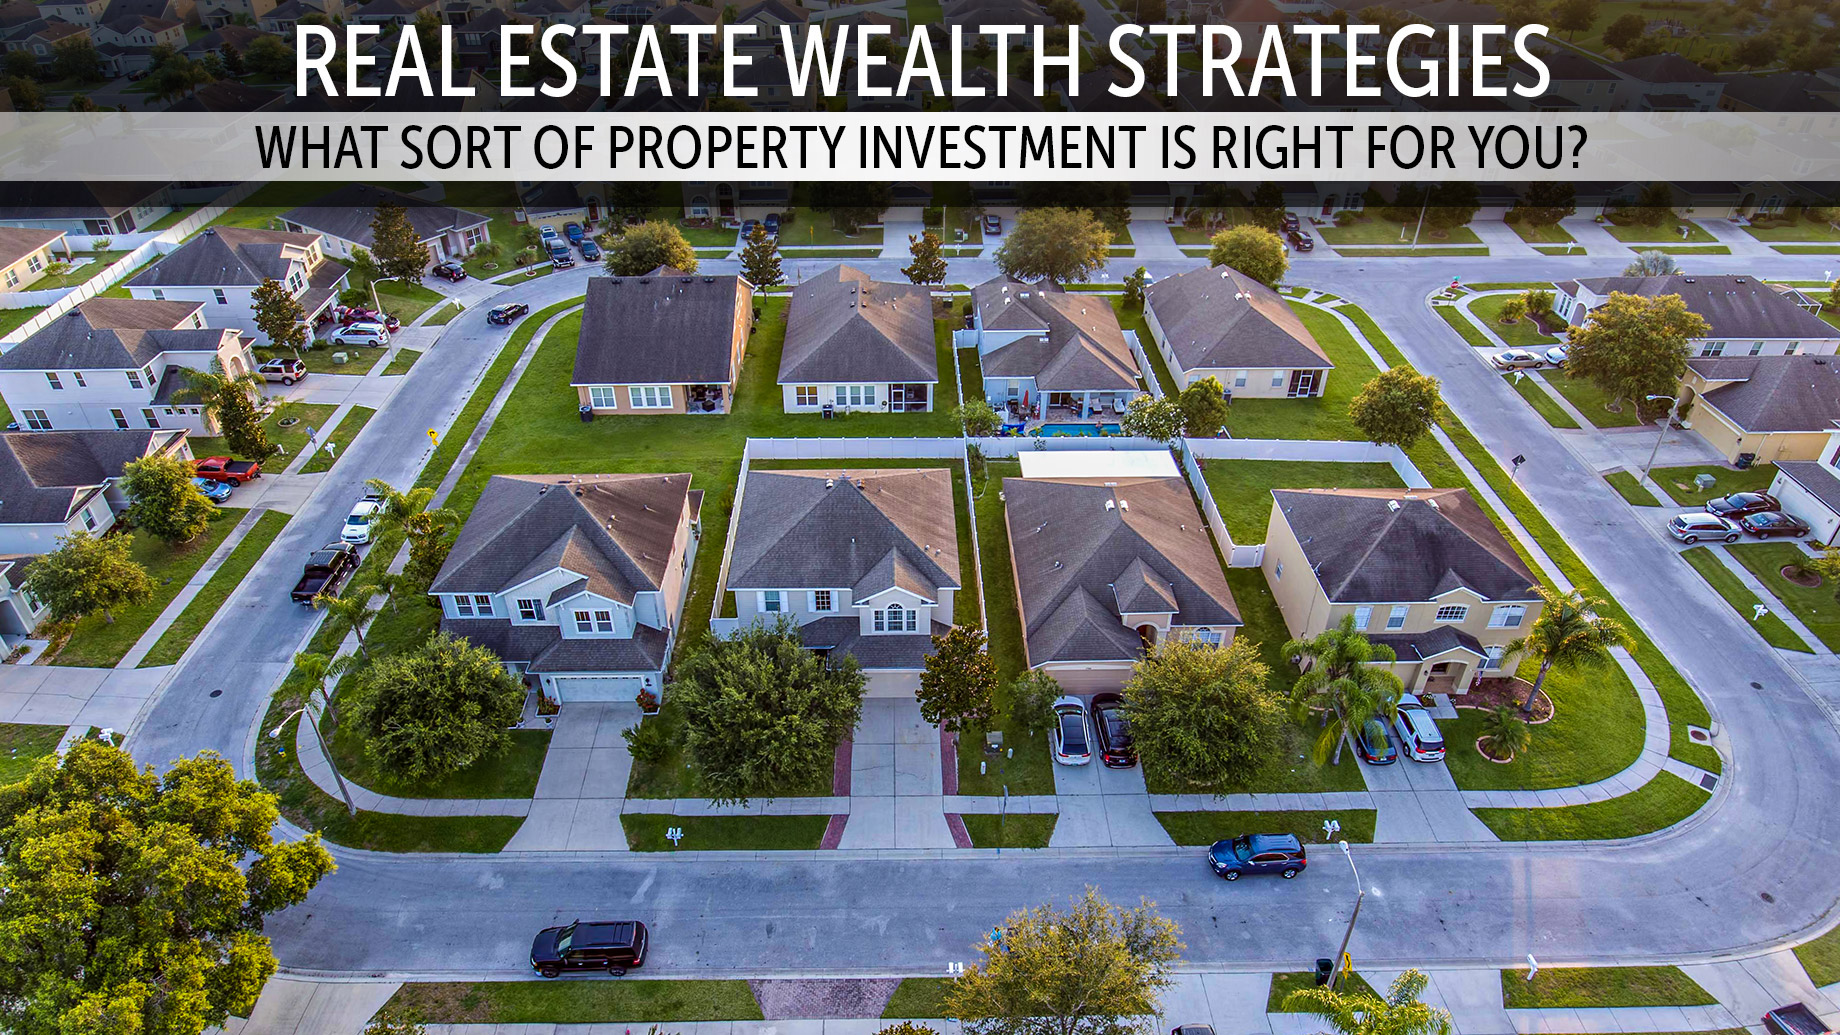 Real Estate Wealth Strategies - What Sort of Property Investment Is Right for You